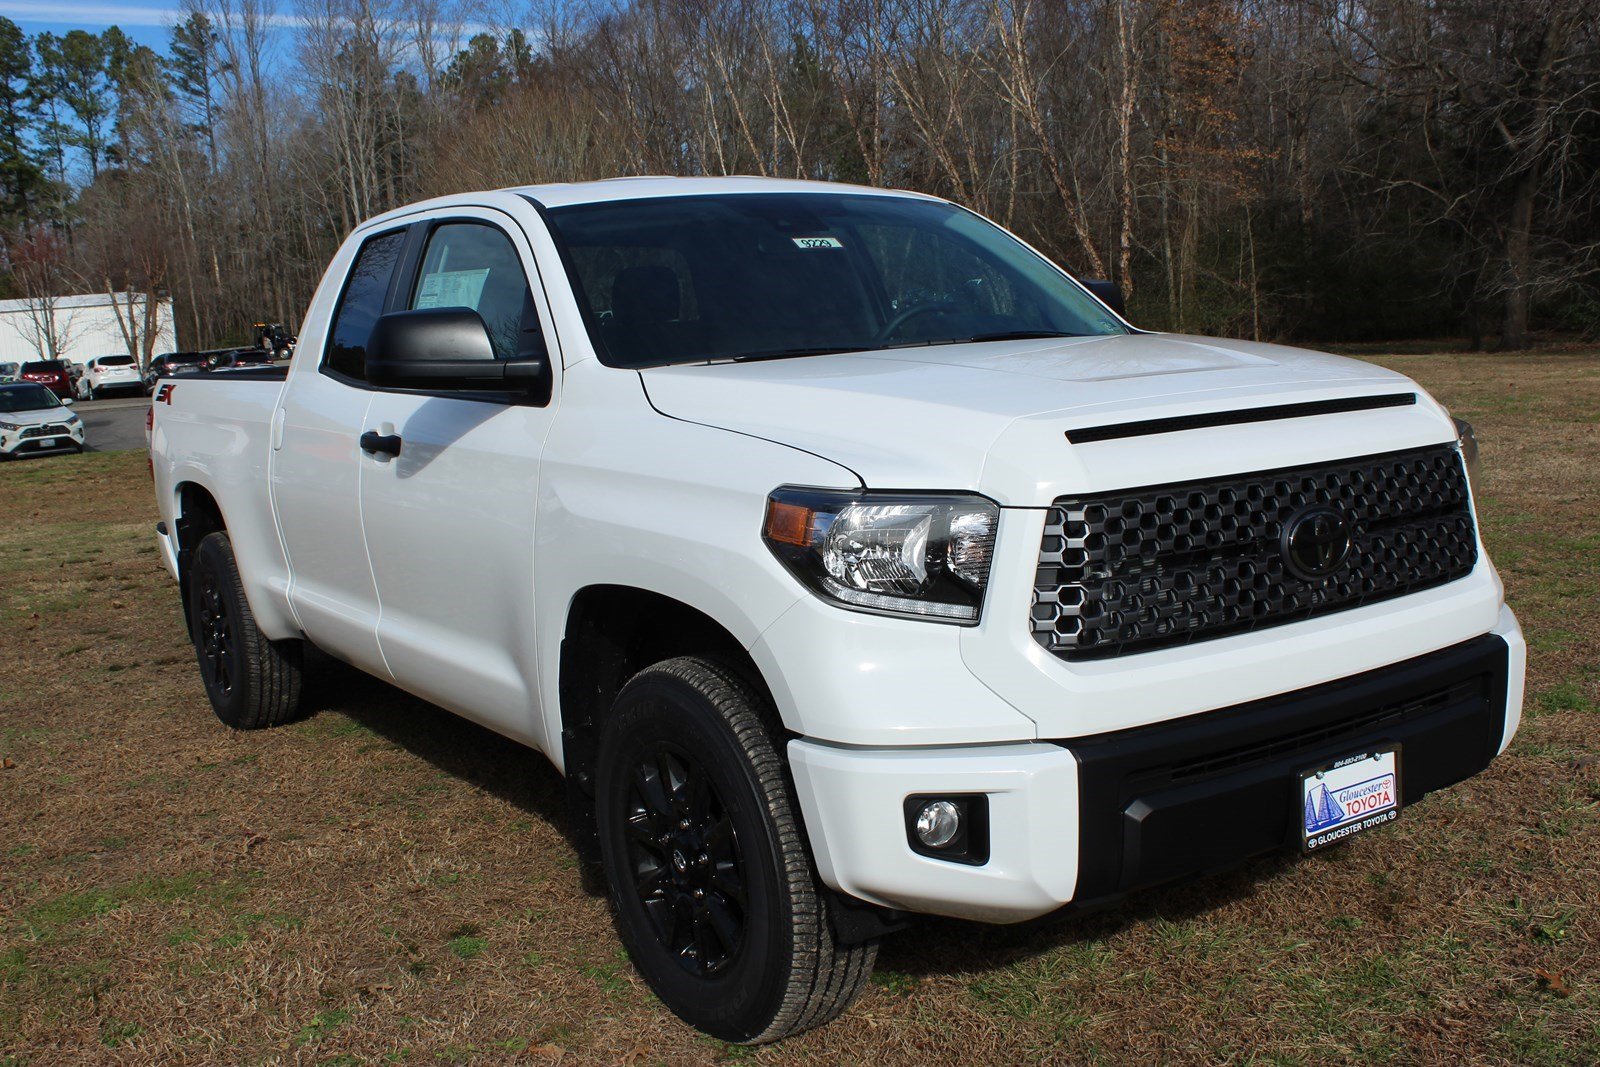 New 2020 Toyota Tundra 4WD SR5 Crew Cab Pickup in Gloucester #9229